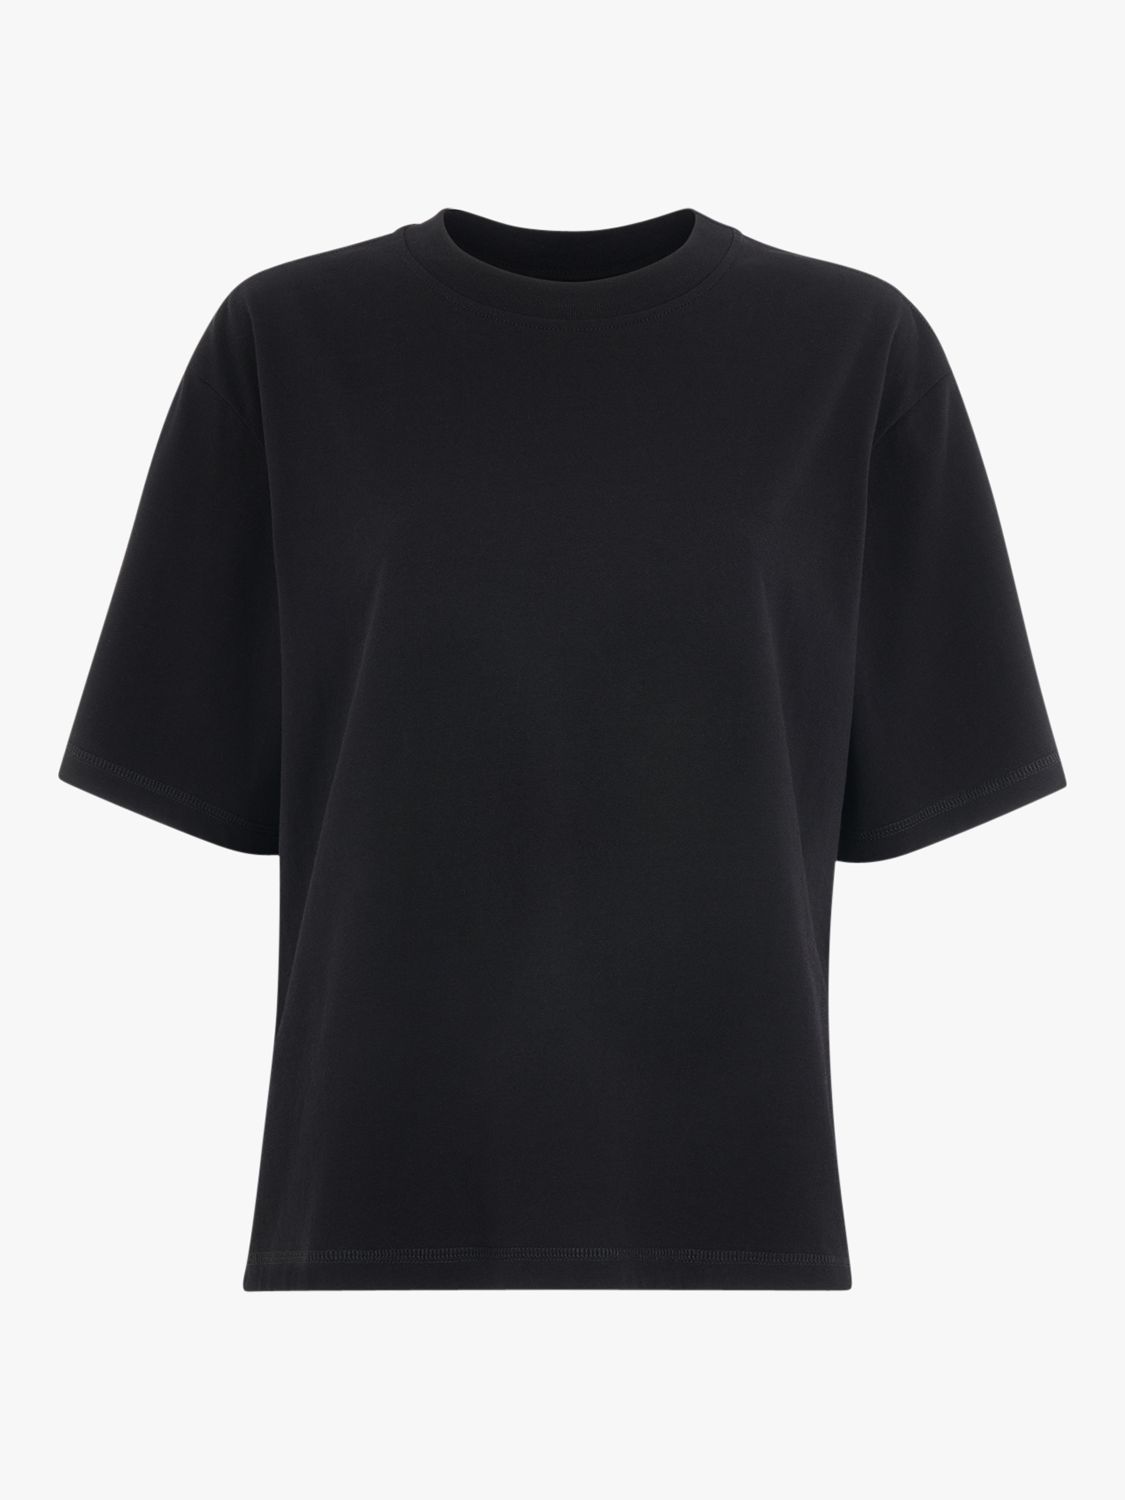 Whistles Relaxed Cotton T-Shirt, Black at John Lewis & Partners